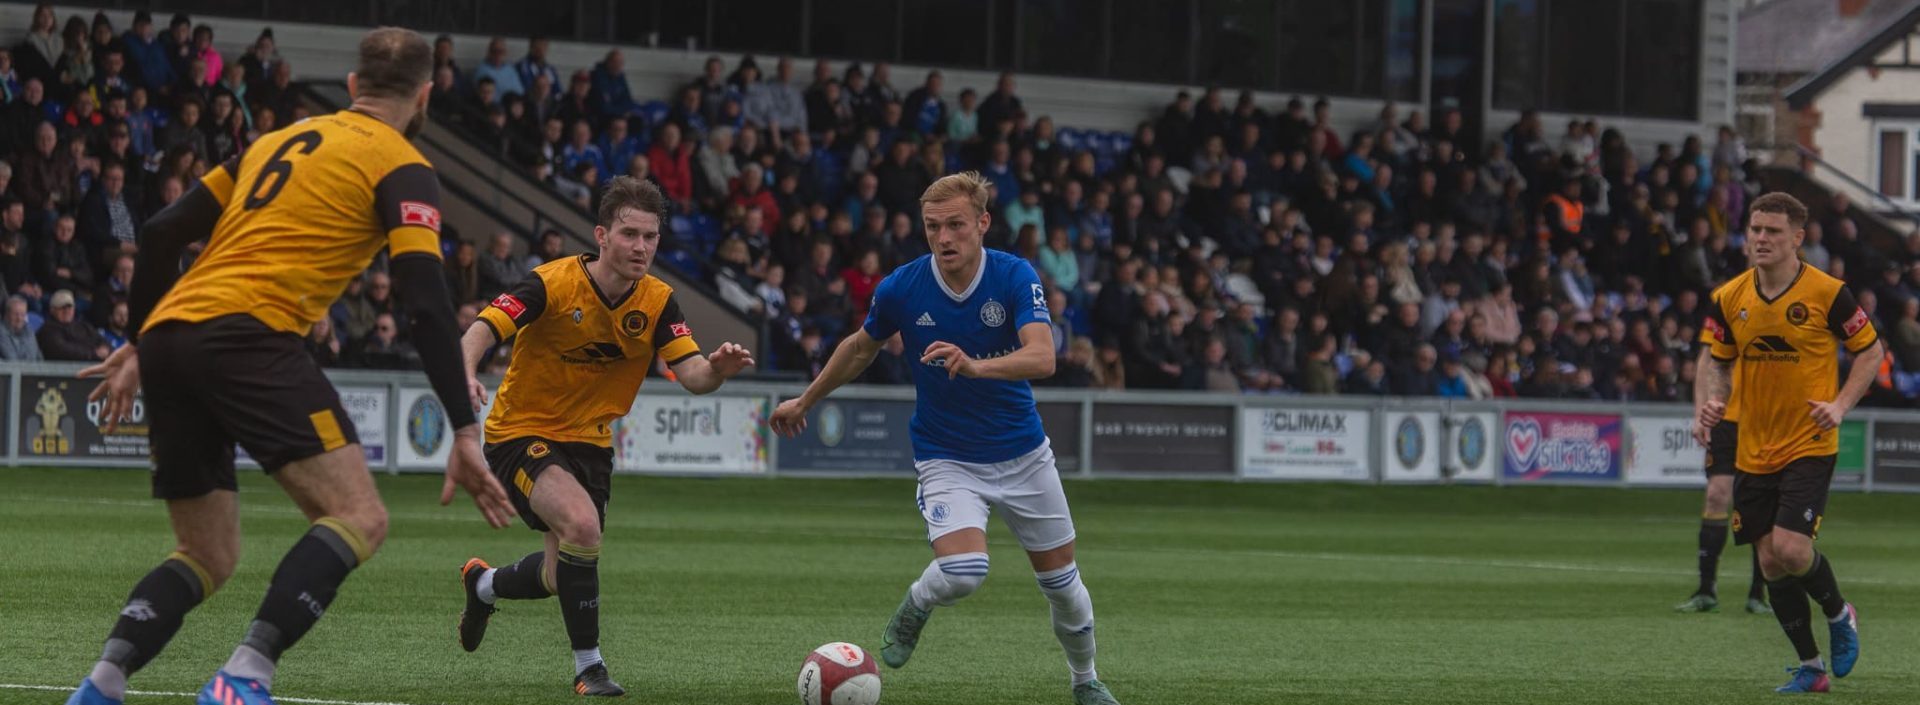 MATCH PREVIEW: MOSSLEY V MACCLESFIELD